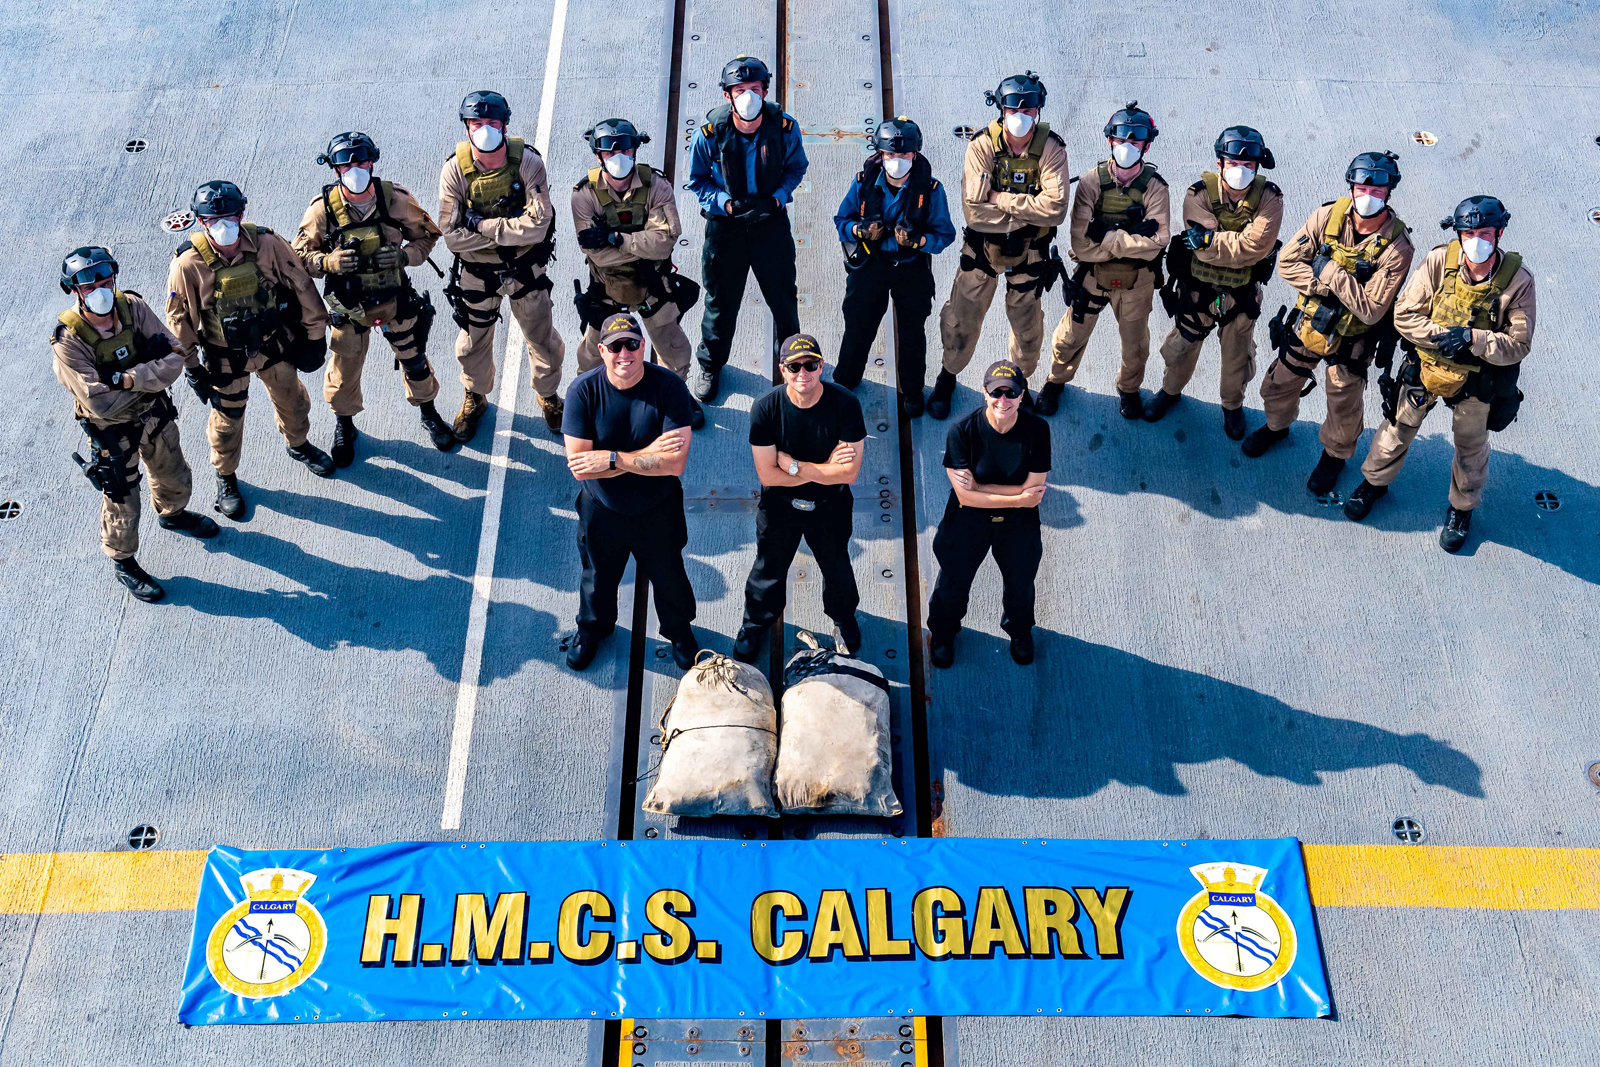 HMCS Calgary’s boarding party team and command team stand with heroin seized during counter-smuggling operations on June 6. Photo by Cpl Lynette Ai Dang, CAF Photo